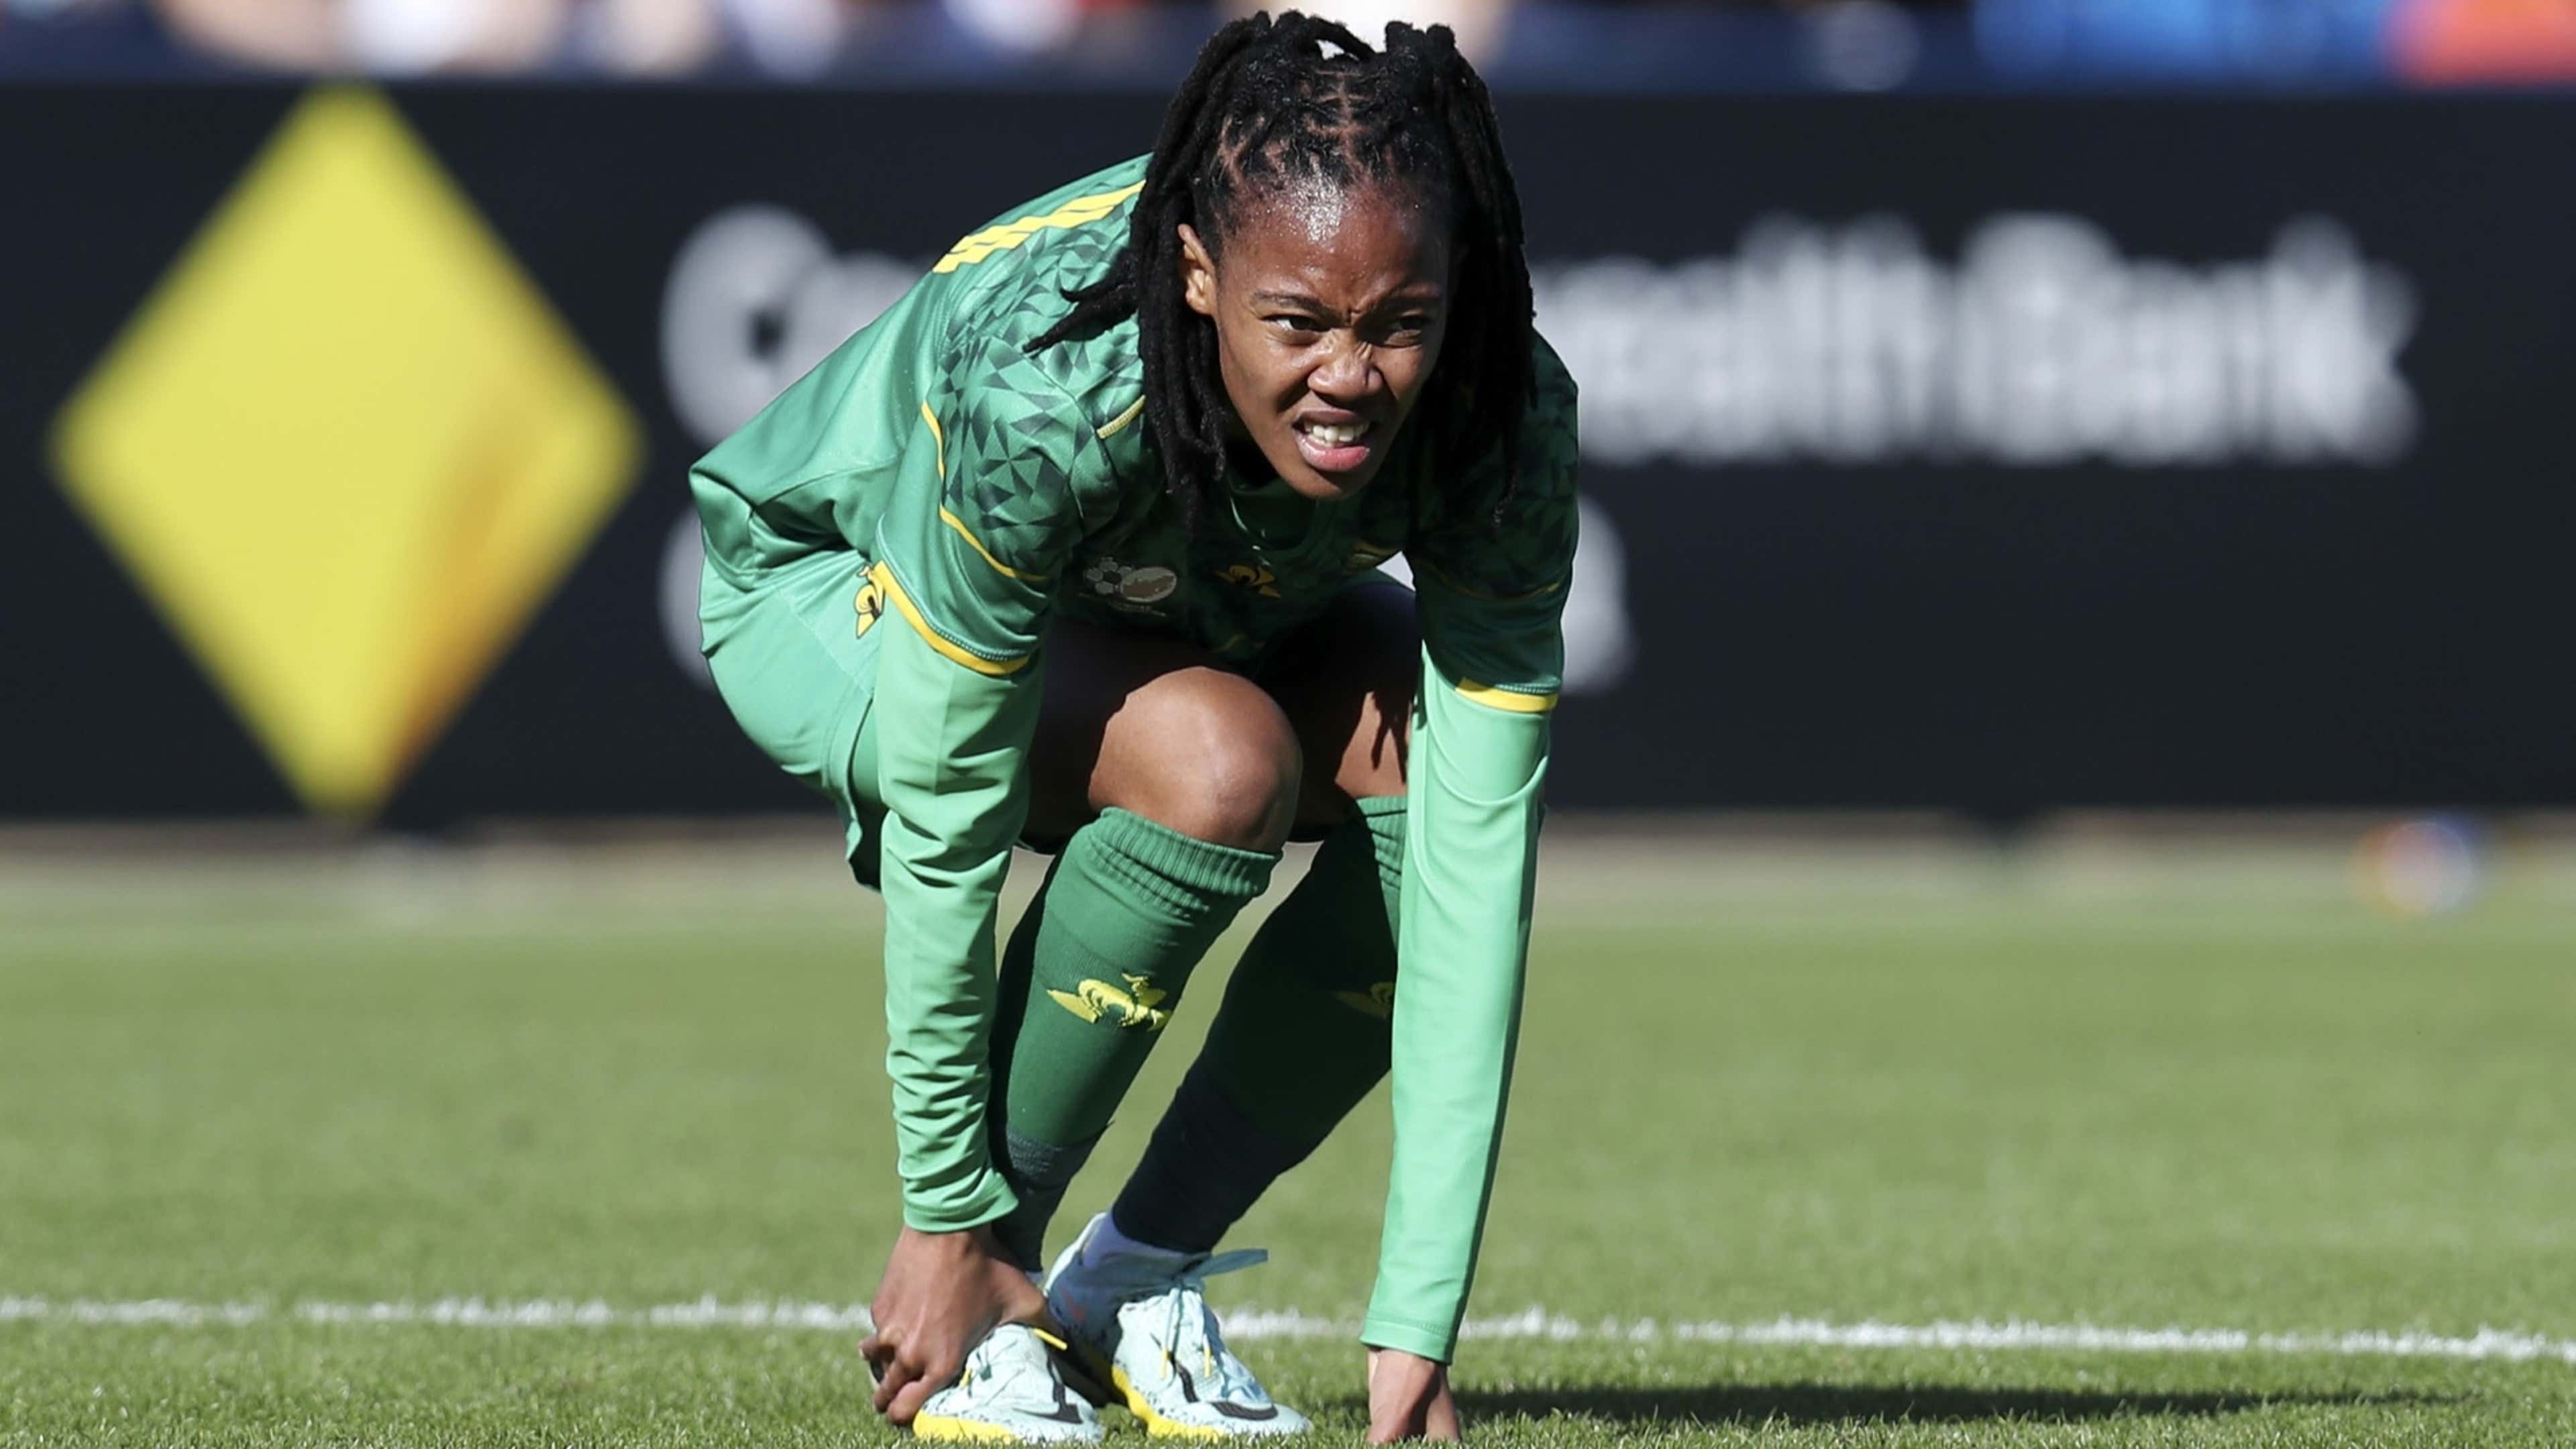 South Africa vs Sweden Preview: Kick-off time, TV channel & squad